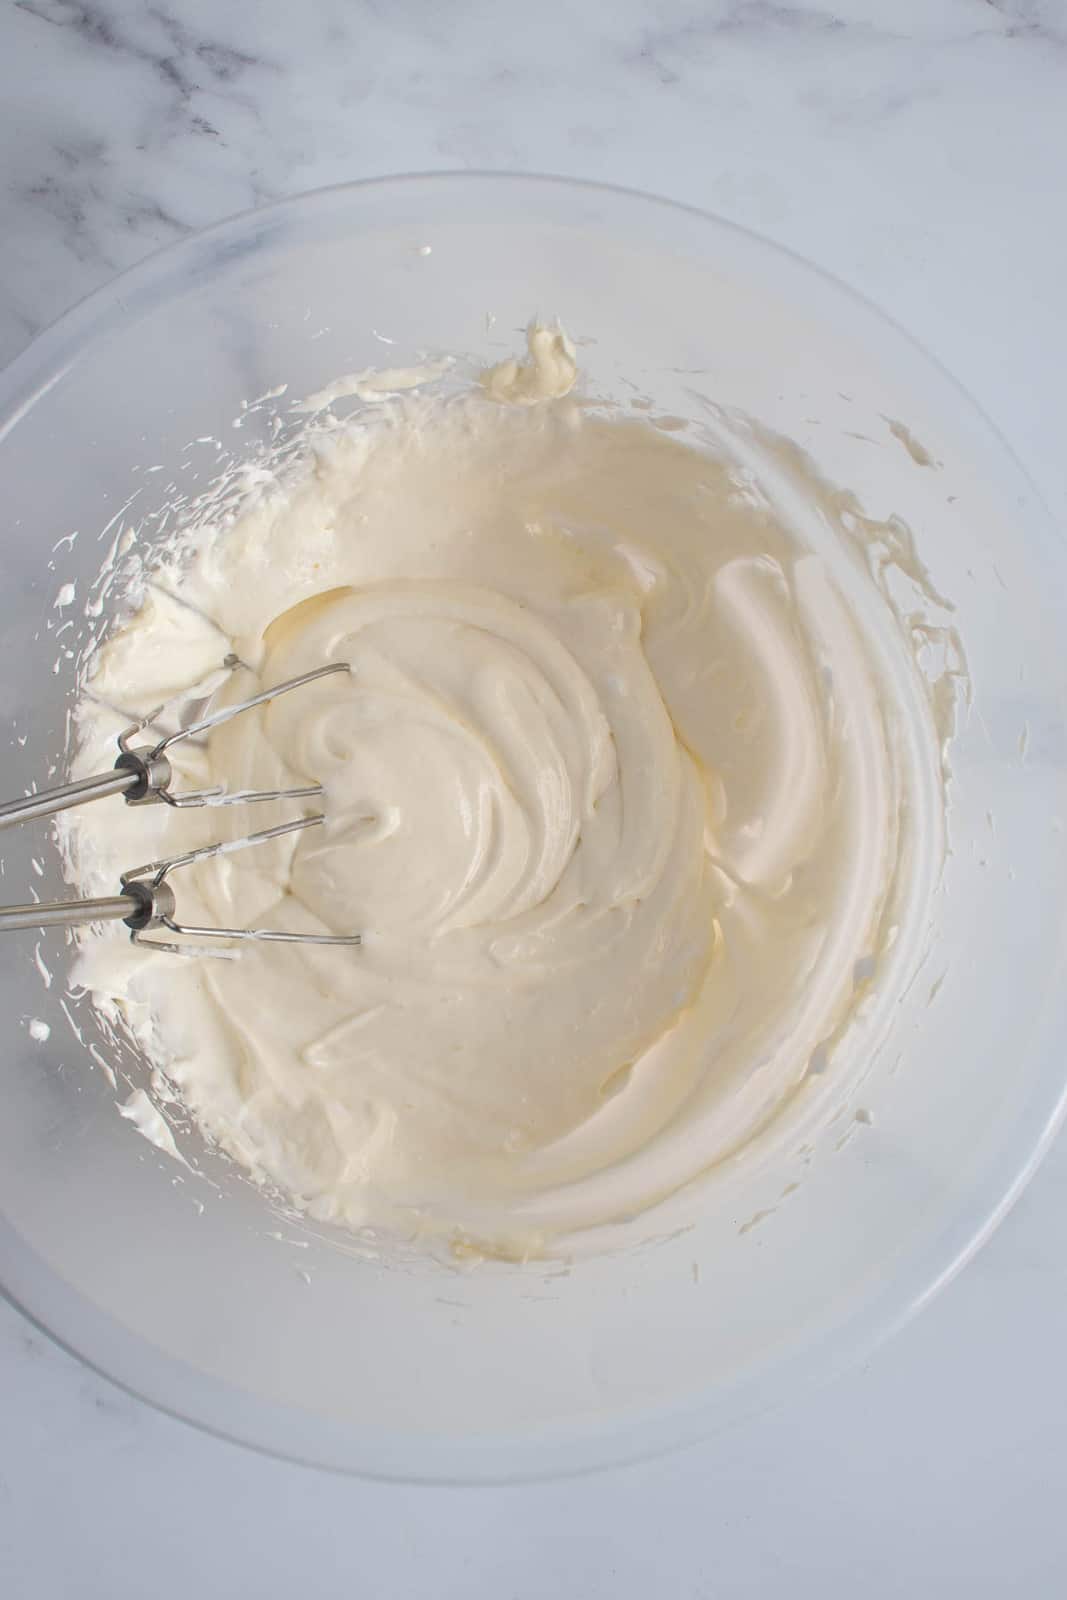 Cream cheese dip in a bowl with an electric mixer.